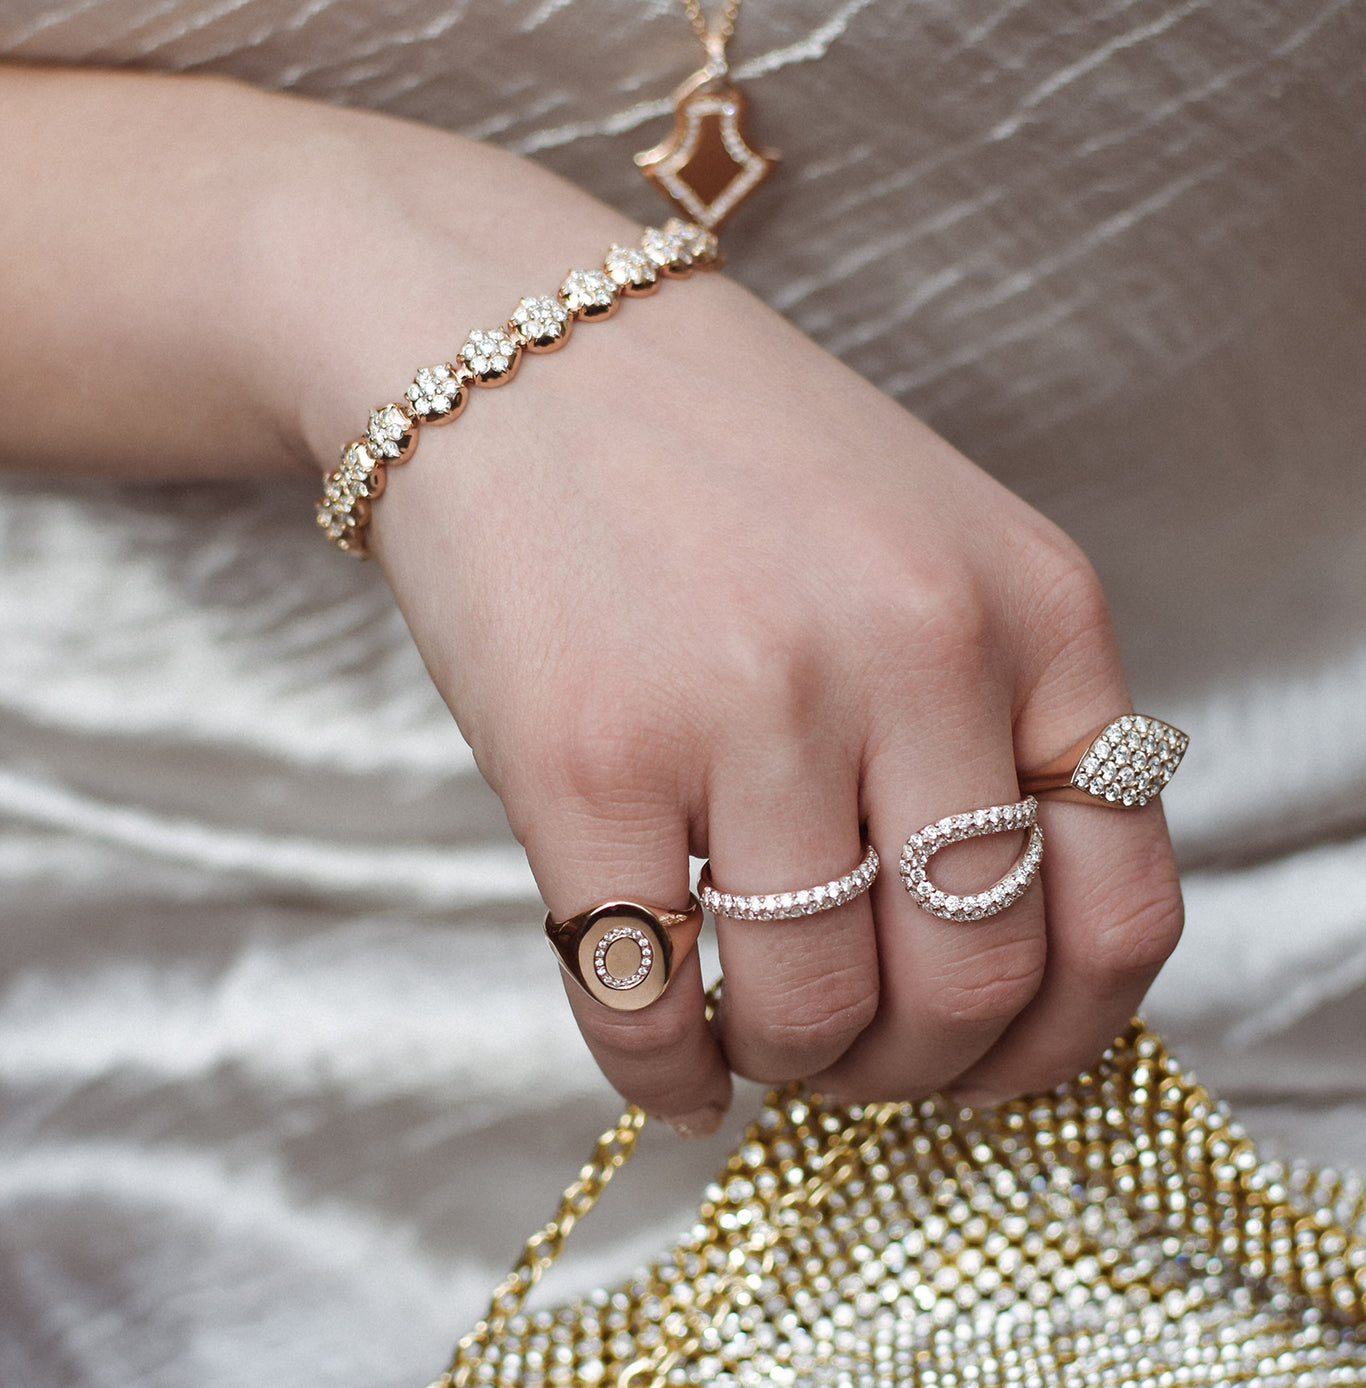 Mini Chilla Ring shown worn with the Athena Ring and Gemma Ring. The Crown Tennis Bracelet worn on the wrist.